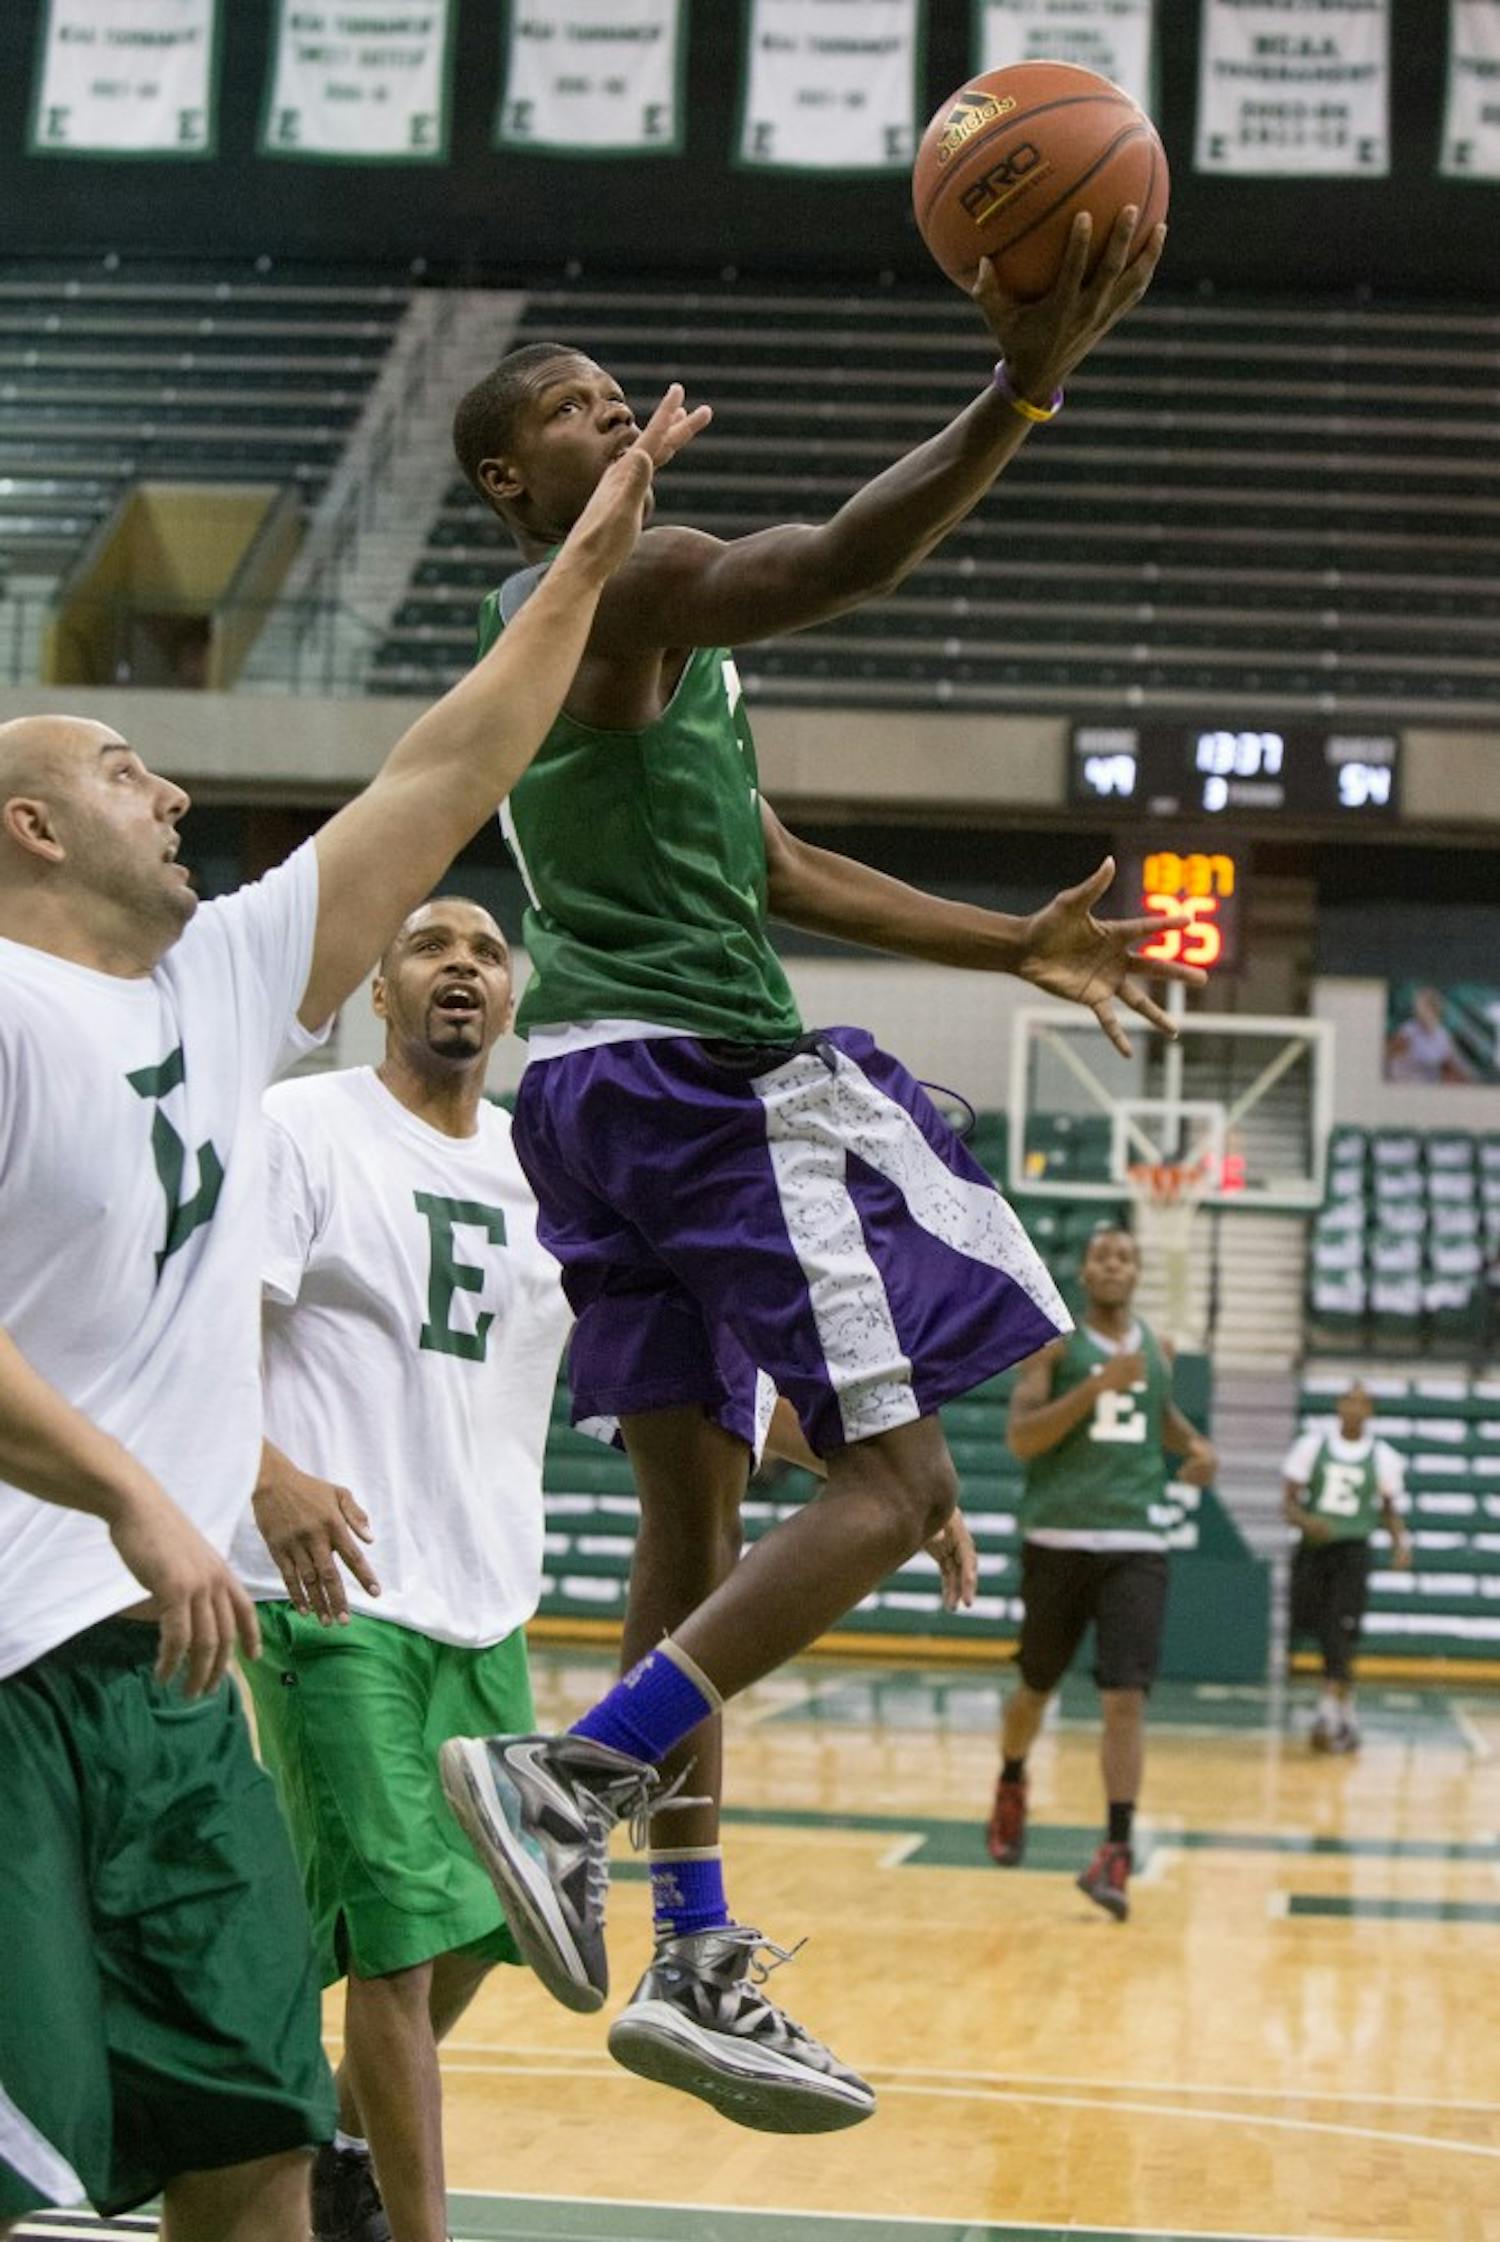 	The Student team (green) won for the first time in the 3rd annual game Thursday night at the Convocation Center.